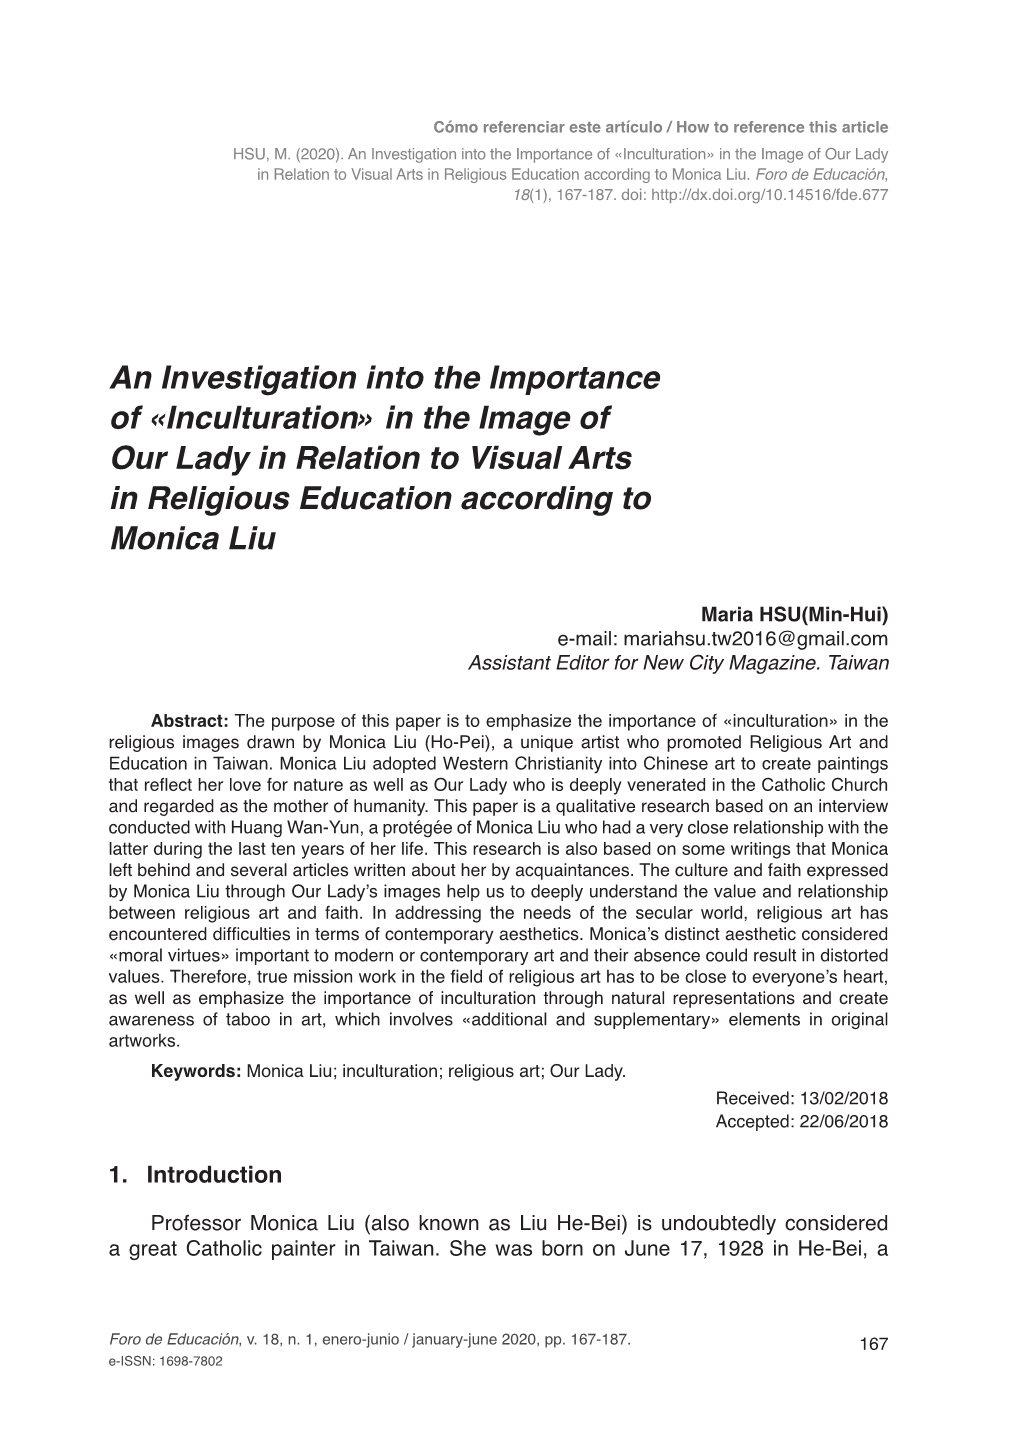 Inculturation» in the Image of Our Lady in Relation to Visual Arts in Religious Education According to Monica Liu